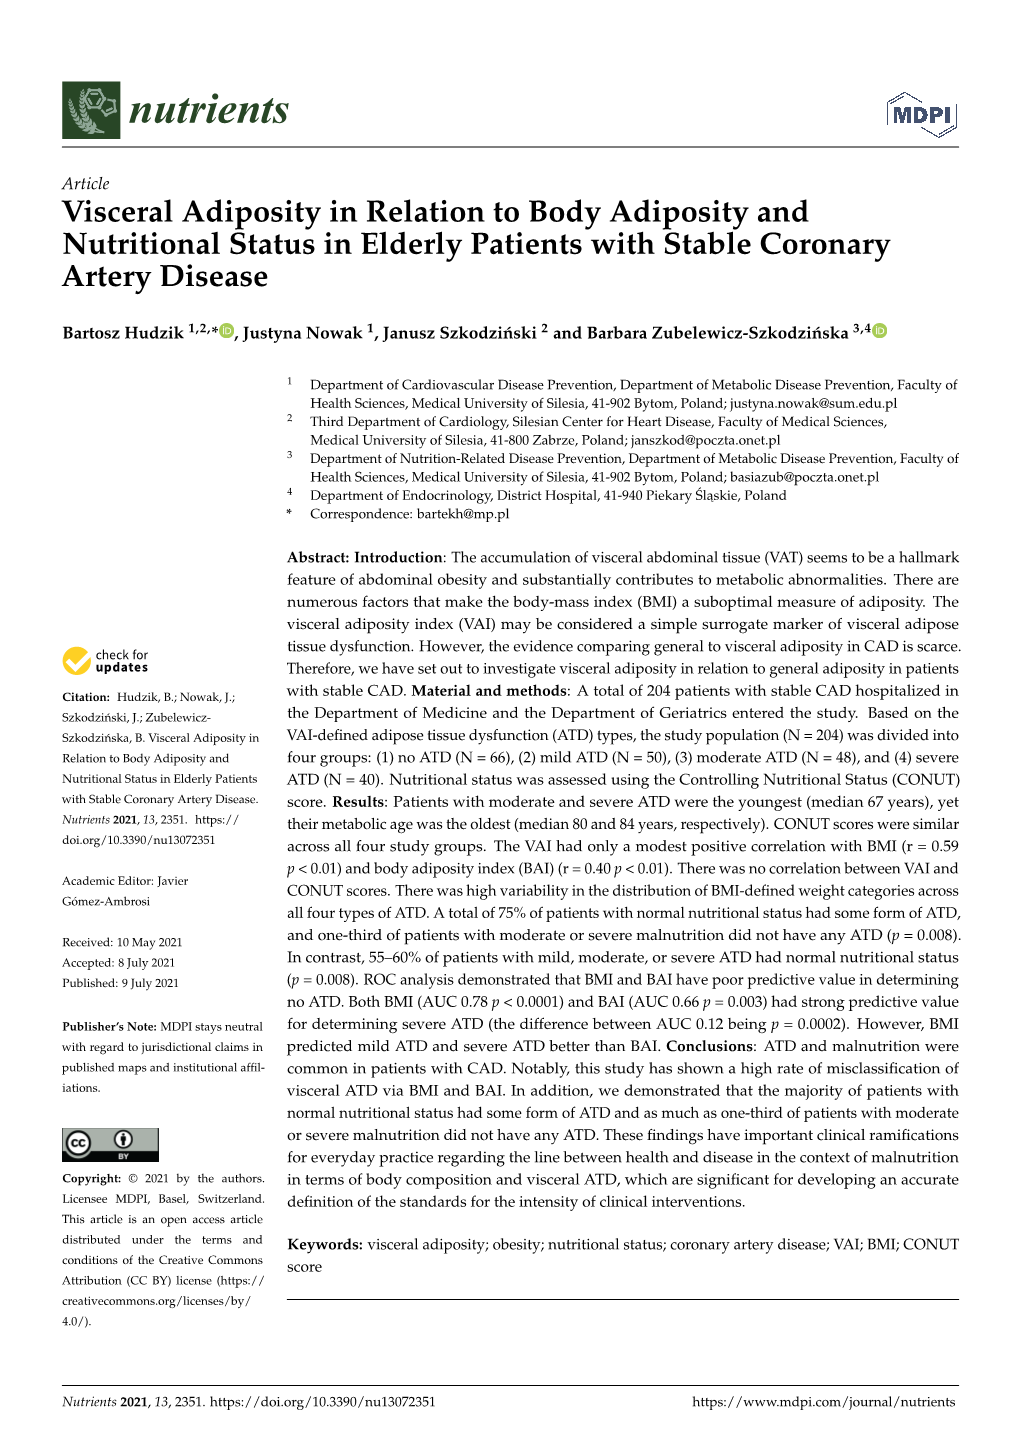 Visceral Adiposity in Relation to Body Adiposity and Nutritional Status in Elderly Patients with Stable Coronary Artery Disease